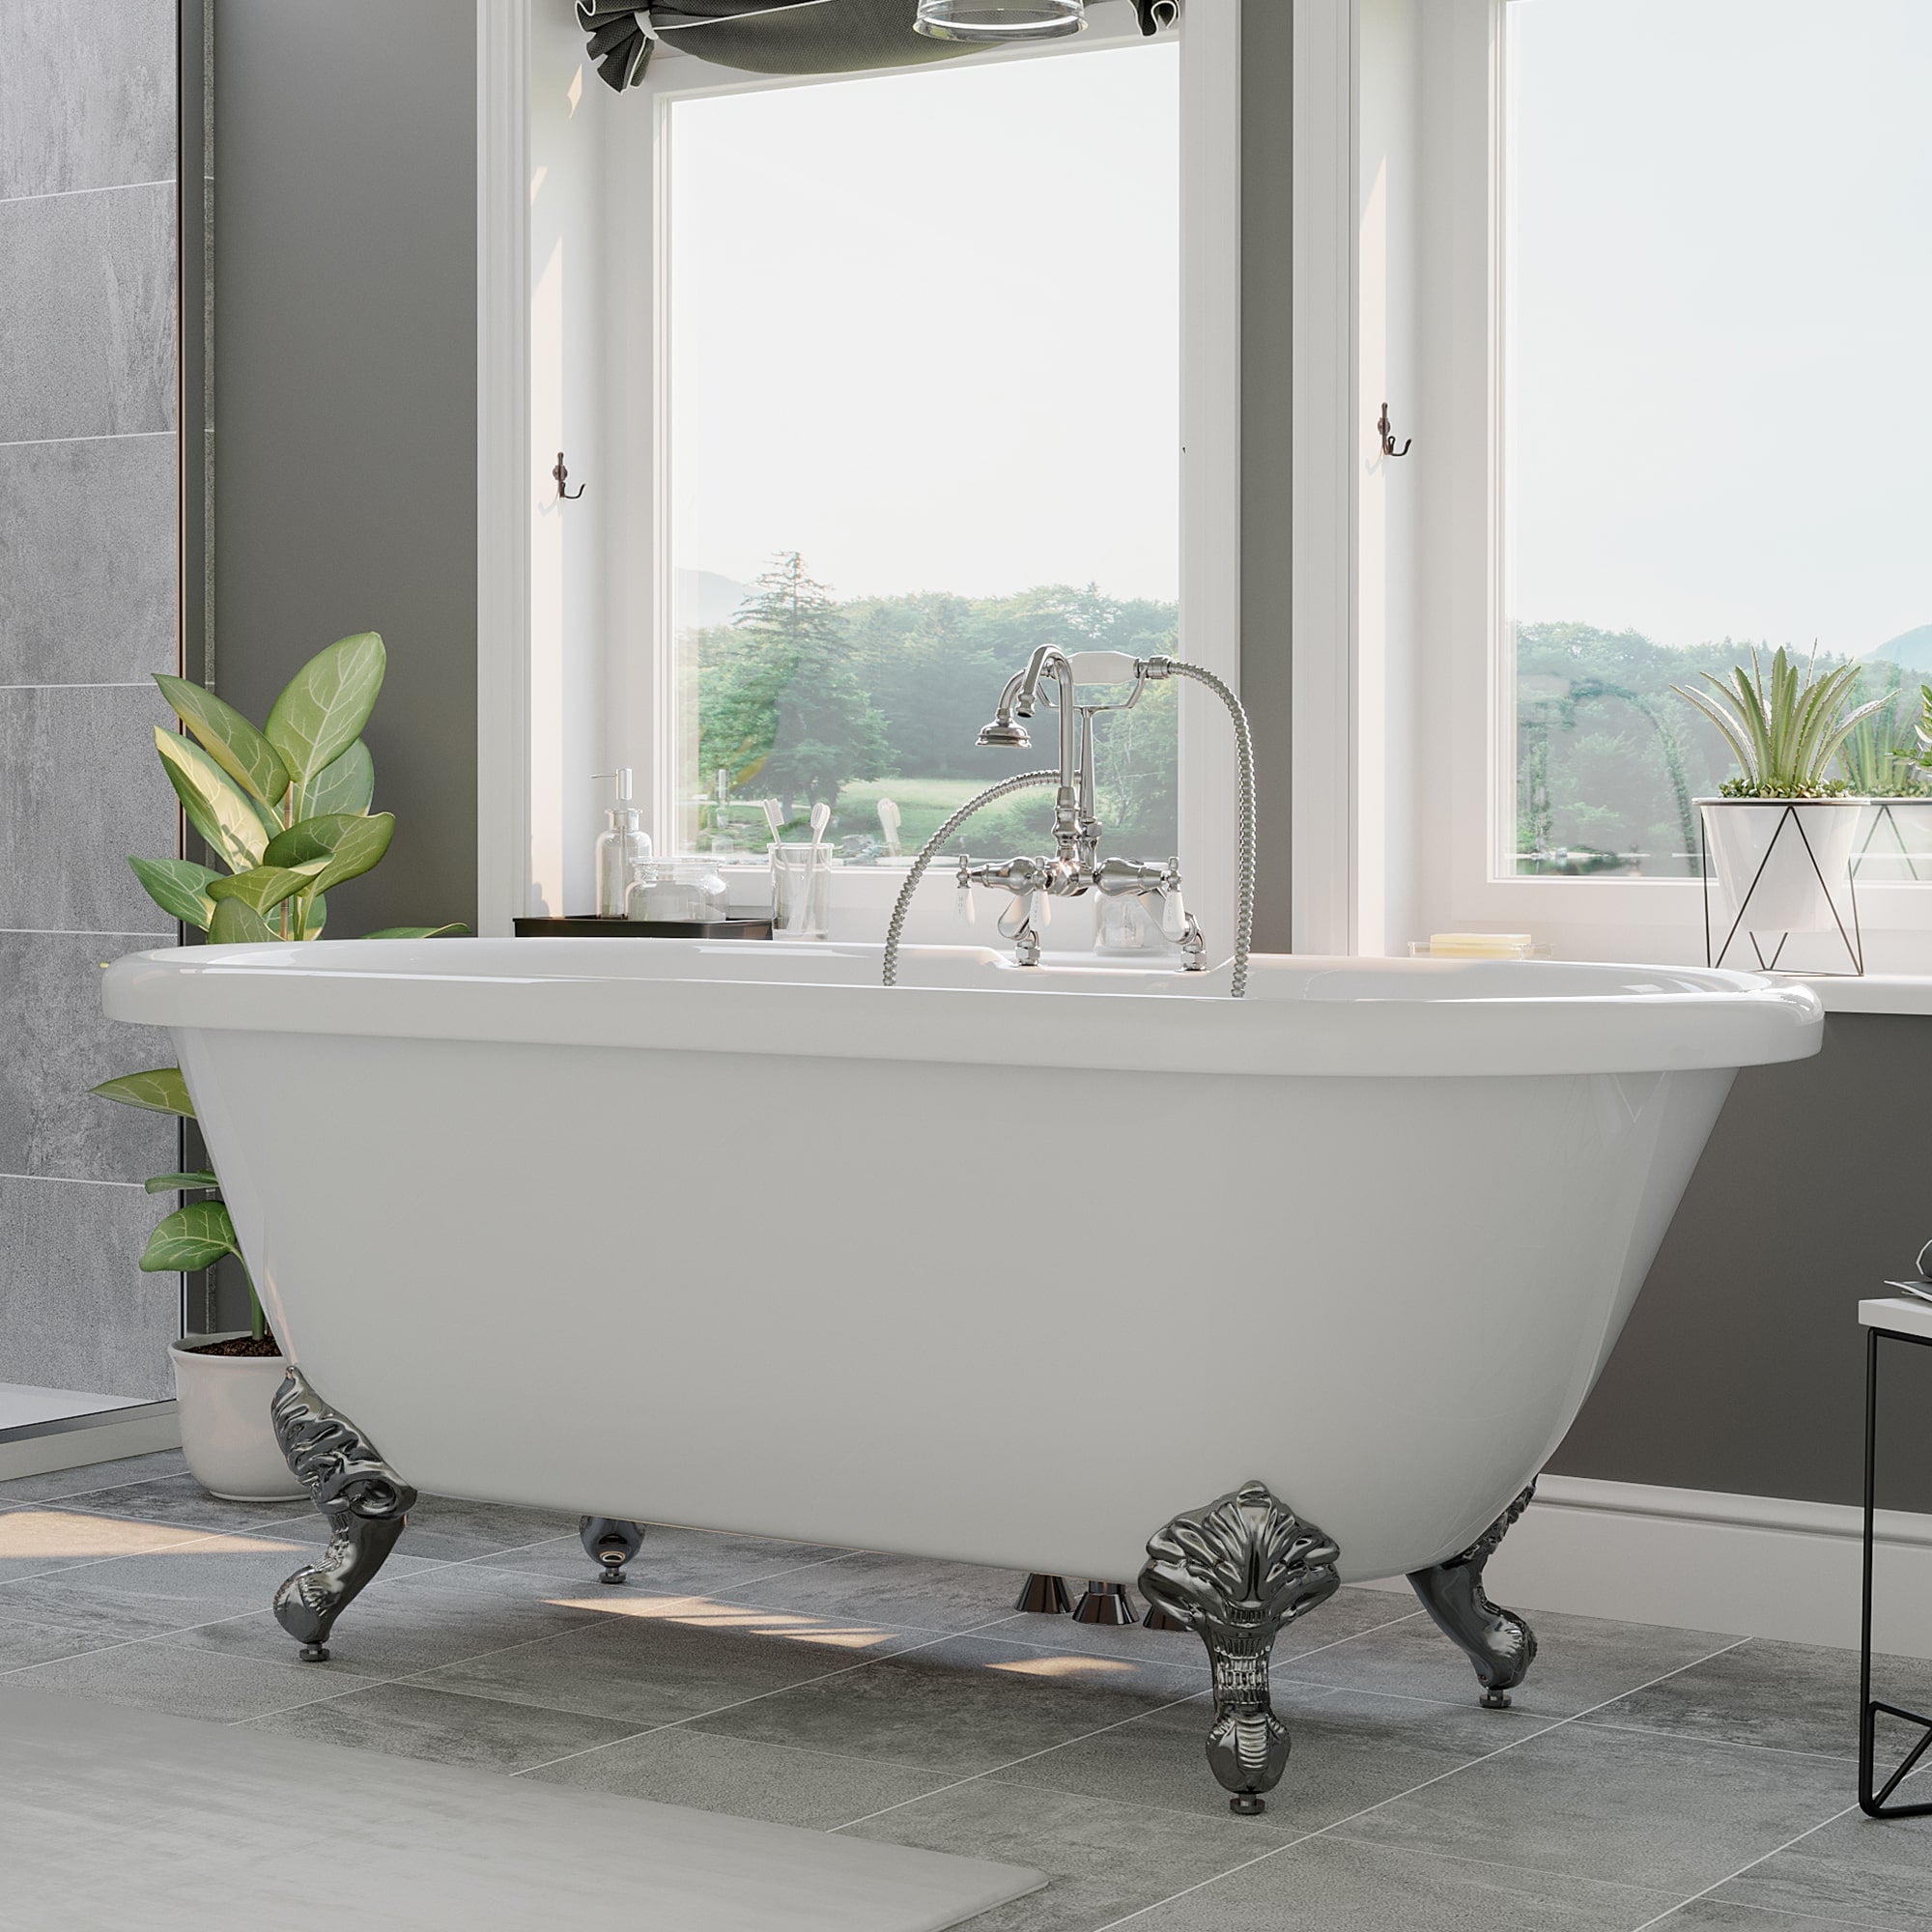 Cambridge Plumbing Double Ended Acrylic Clawfoot Soaking Tub (White Gloss Finish) and Complete Plumbing Package -Brushed nickel ball and claw feet - ADE-684D-PKG-7DH - Vital Hydrotherapy